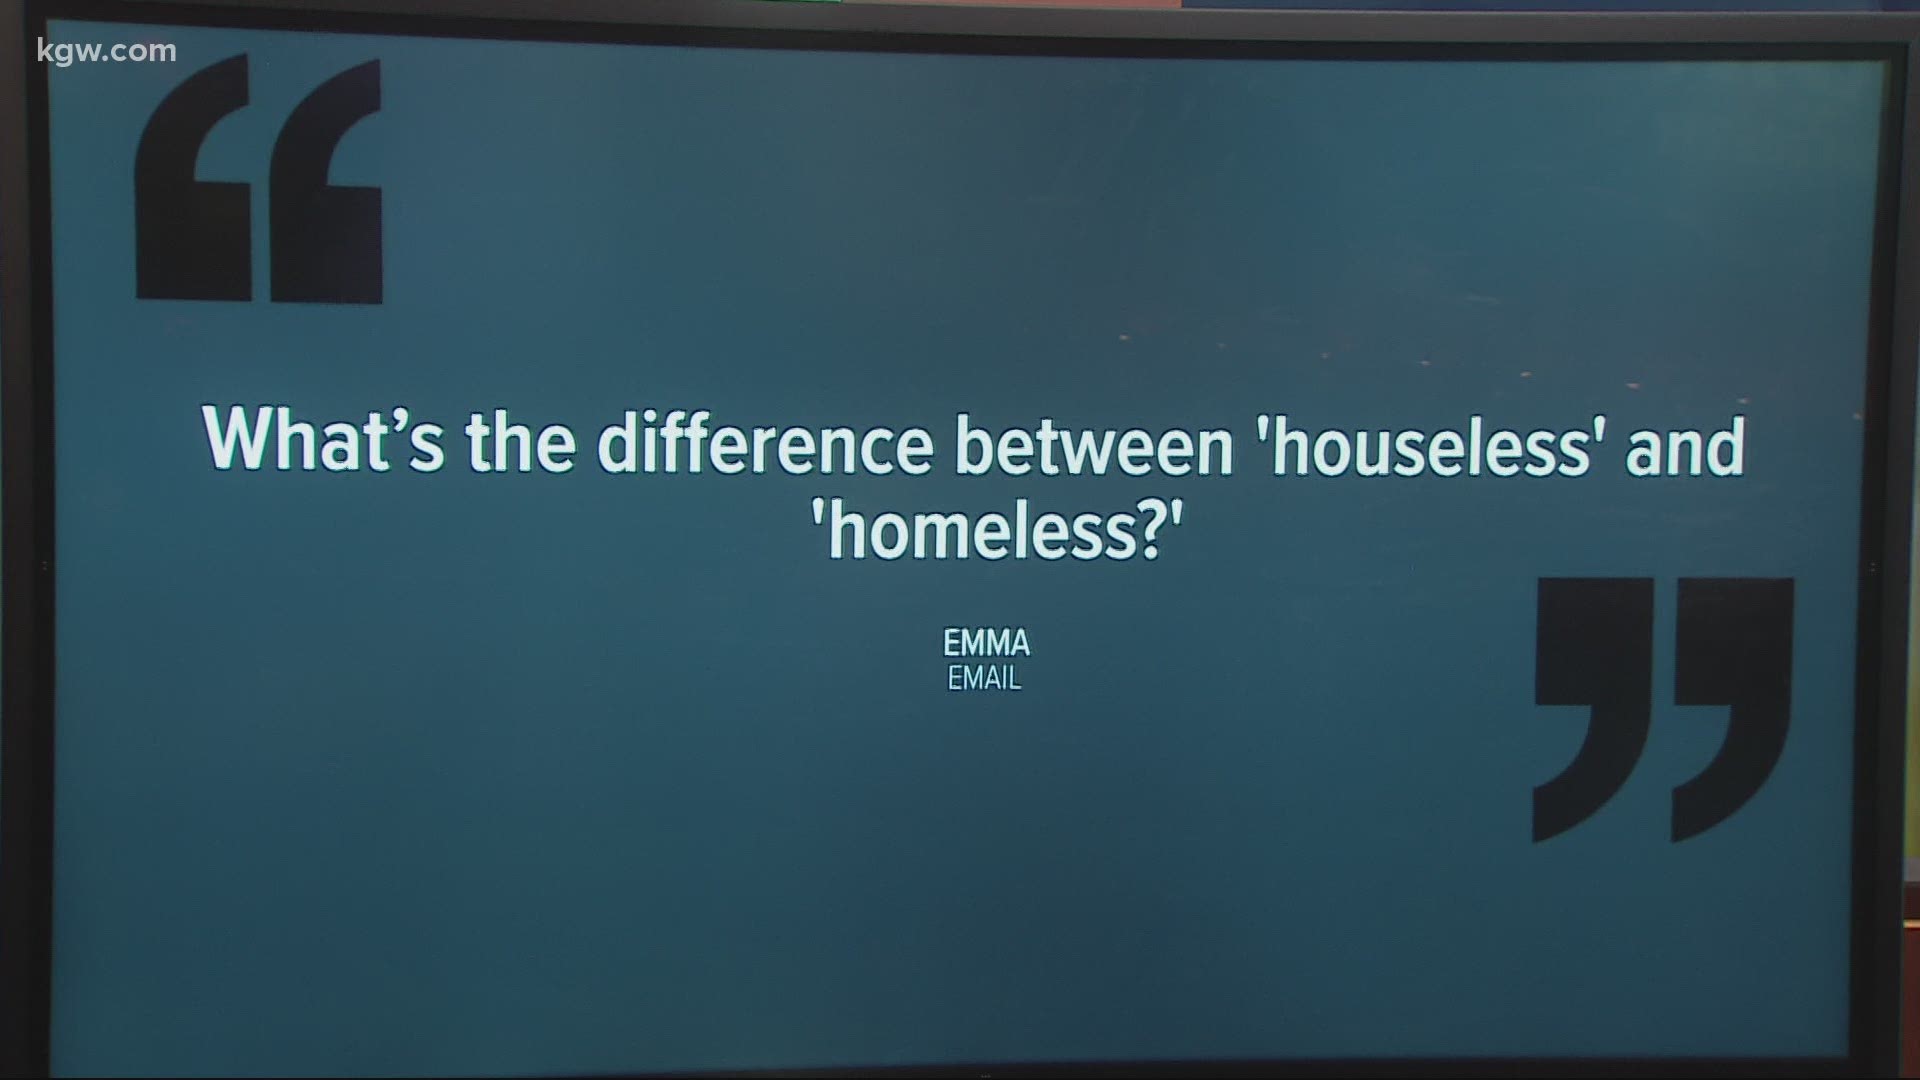 KGW viewers have noticed a change in our wording referencing the homeless community. We still use the word "homeless" in our reporting, but we also use "houseless."